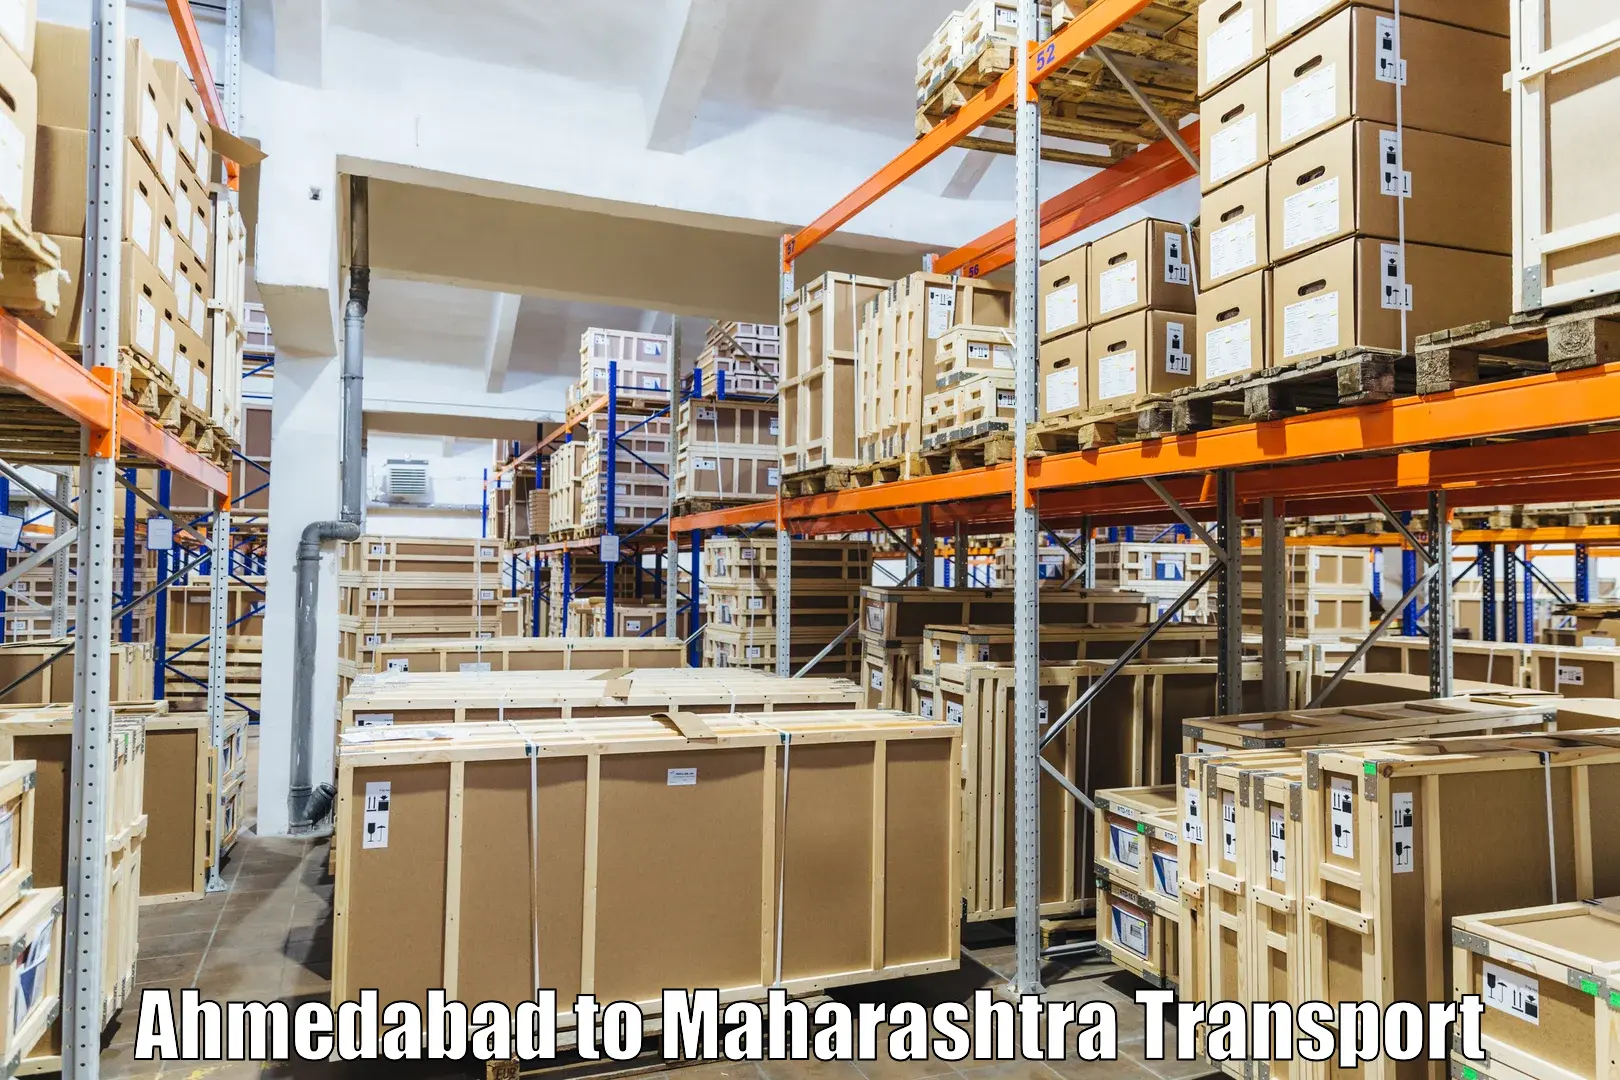 Furniture transport service in Ahmedabad to Solapur